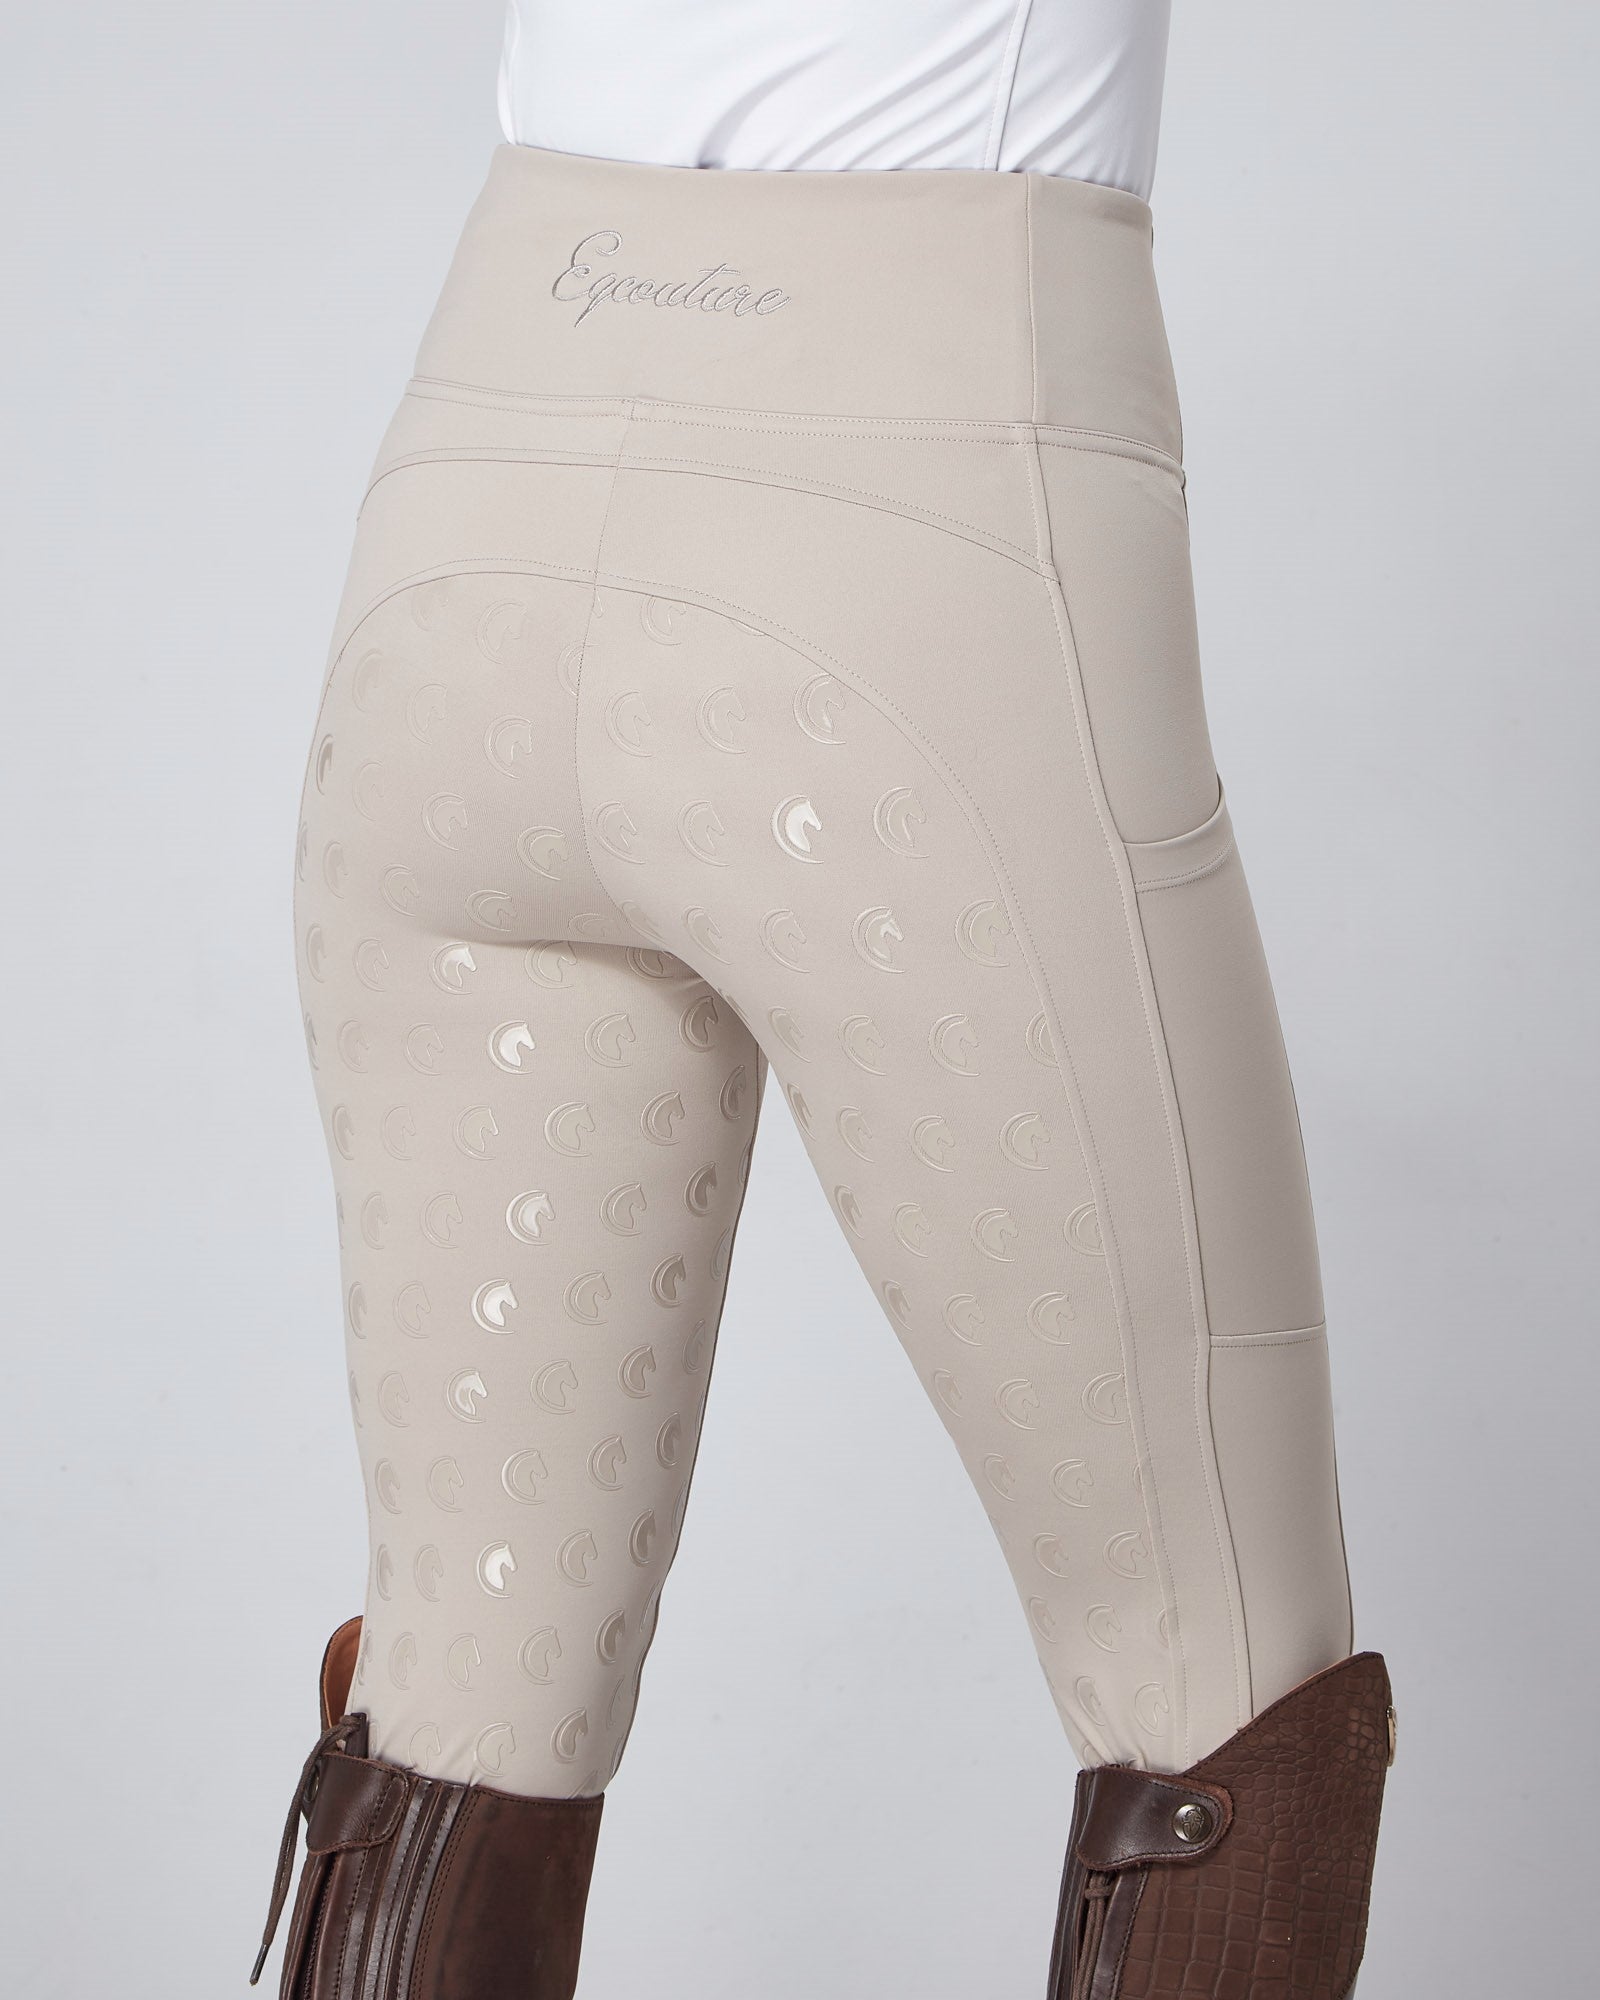 Competition Beige Riding Leggings / Tights with Phone Pockets - HUNTER BEIGE